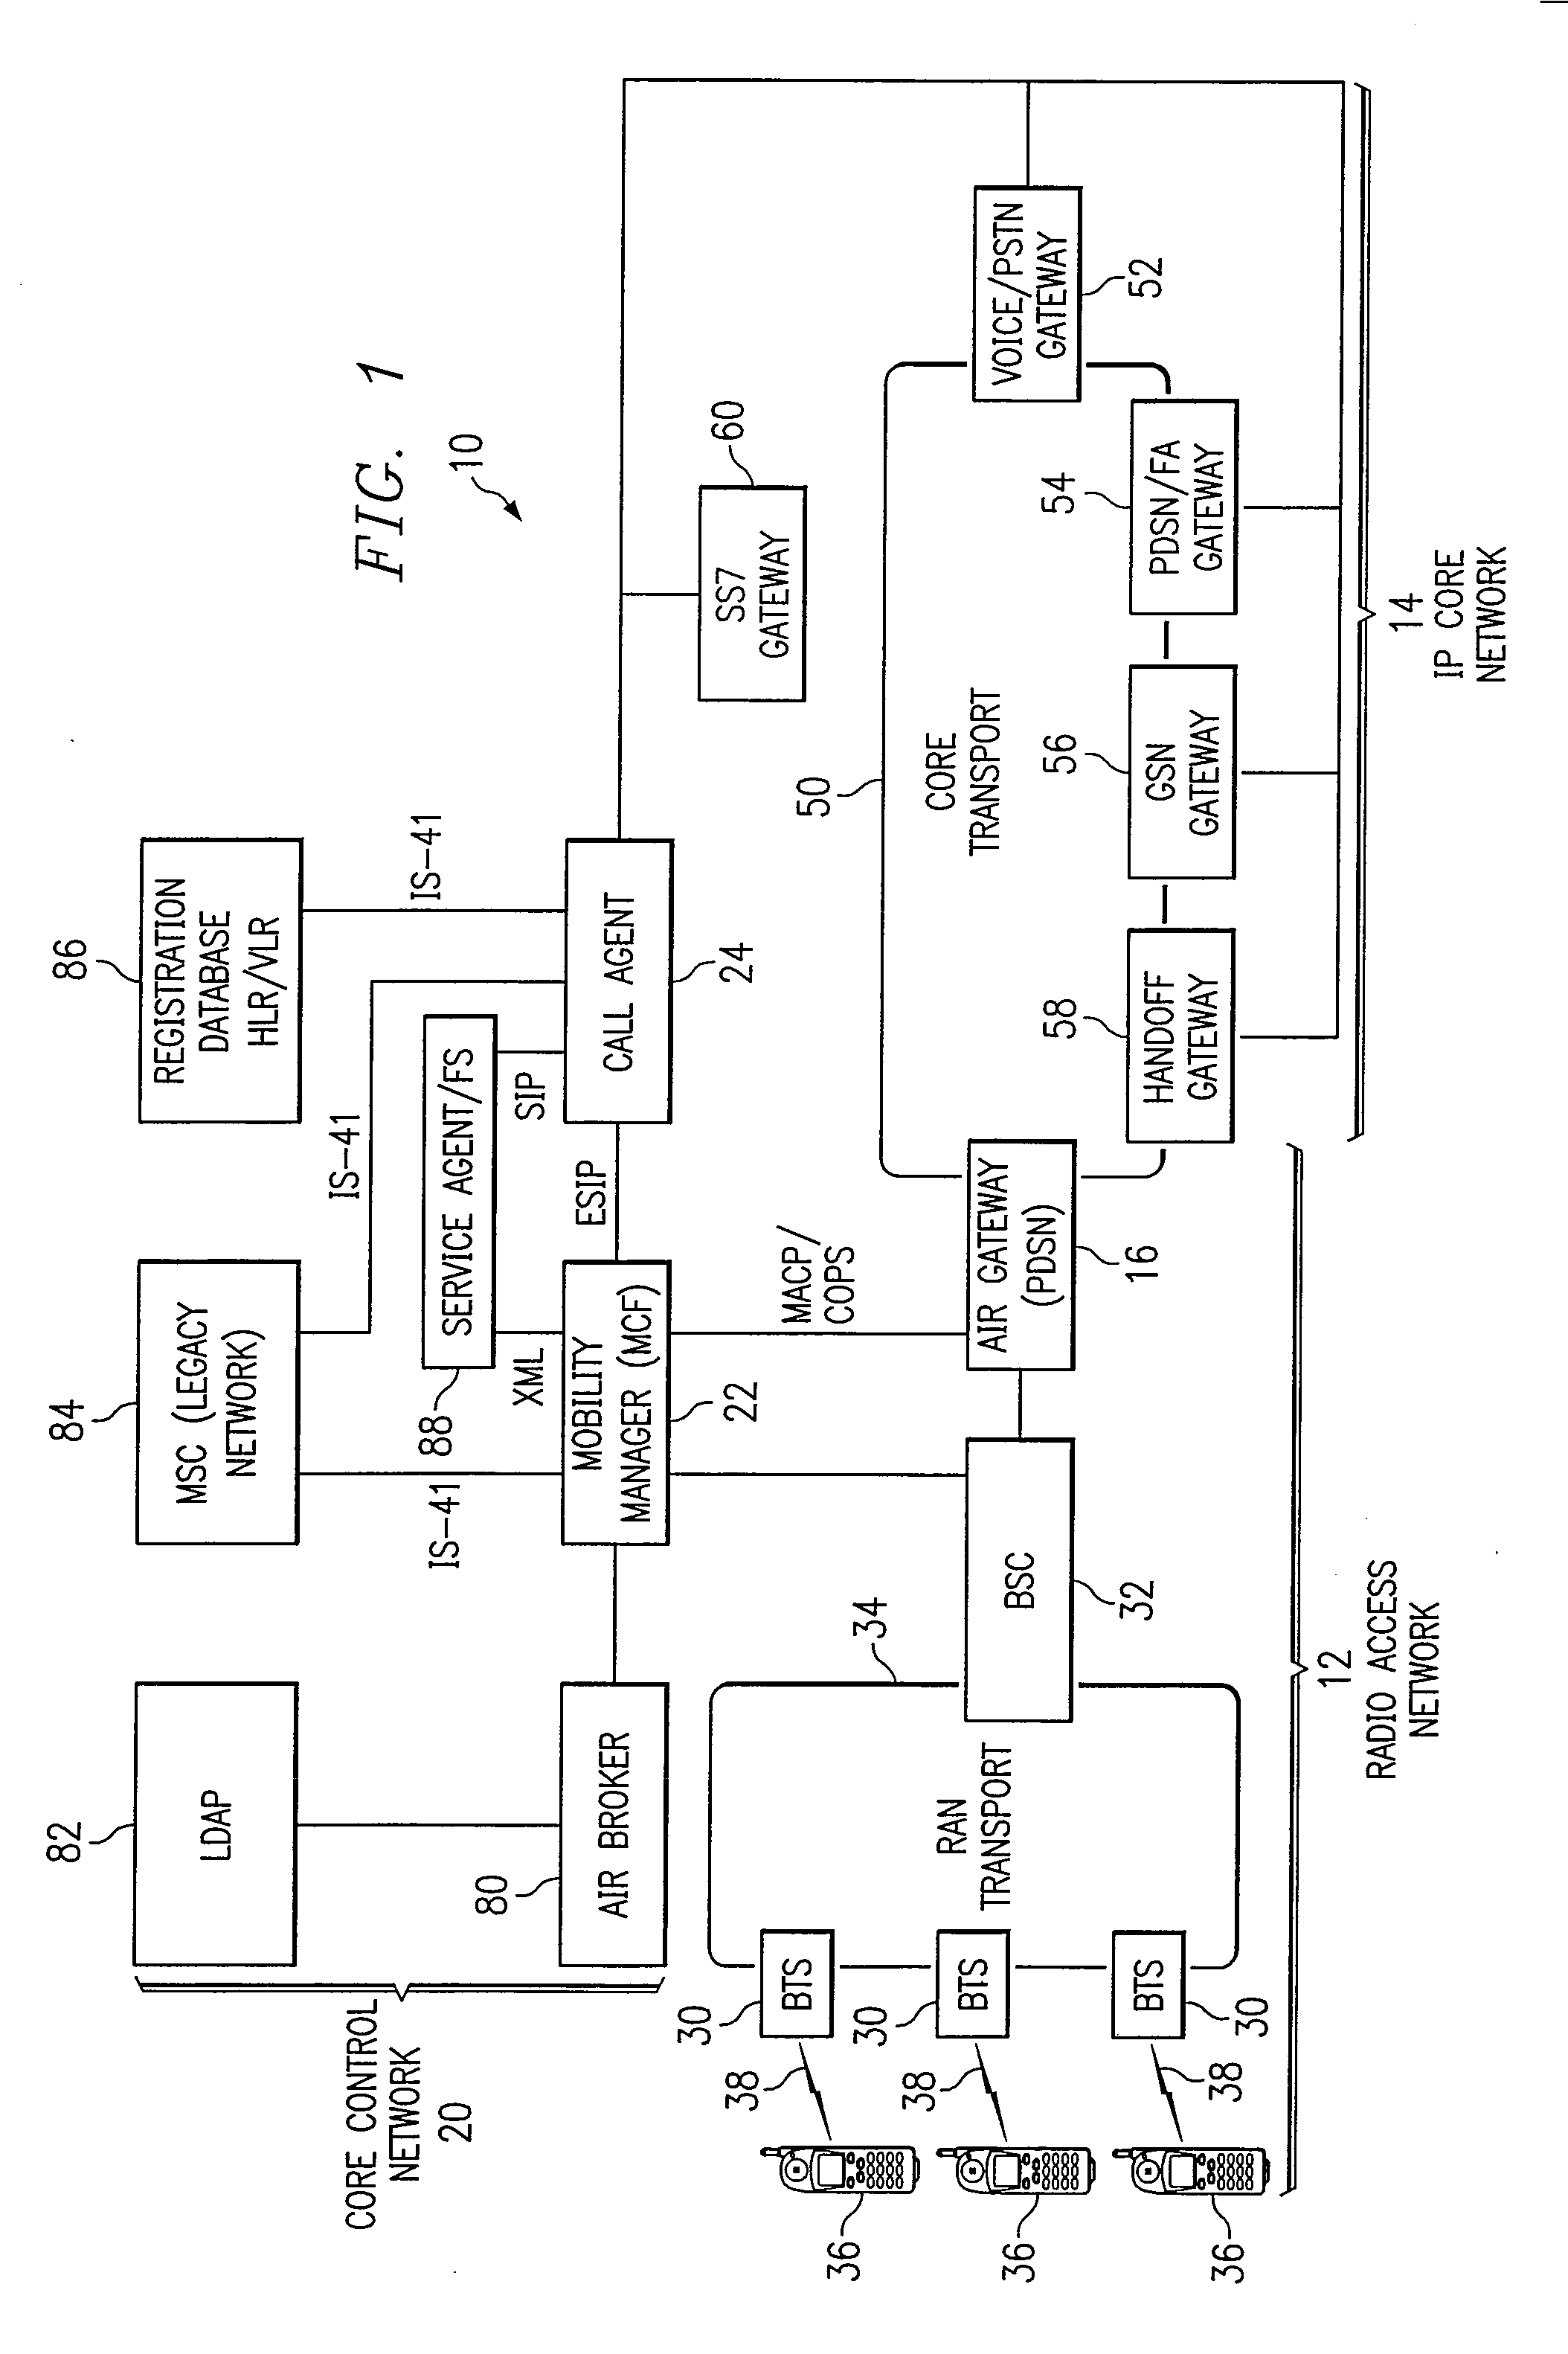 Method and System for Providing Supplementary Services for a Wireless Access Network